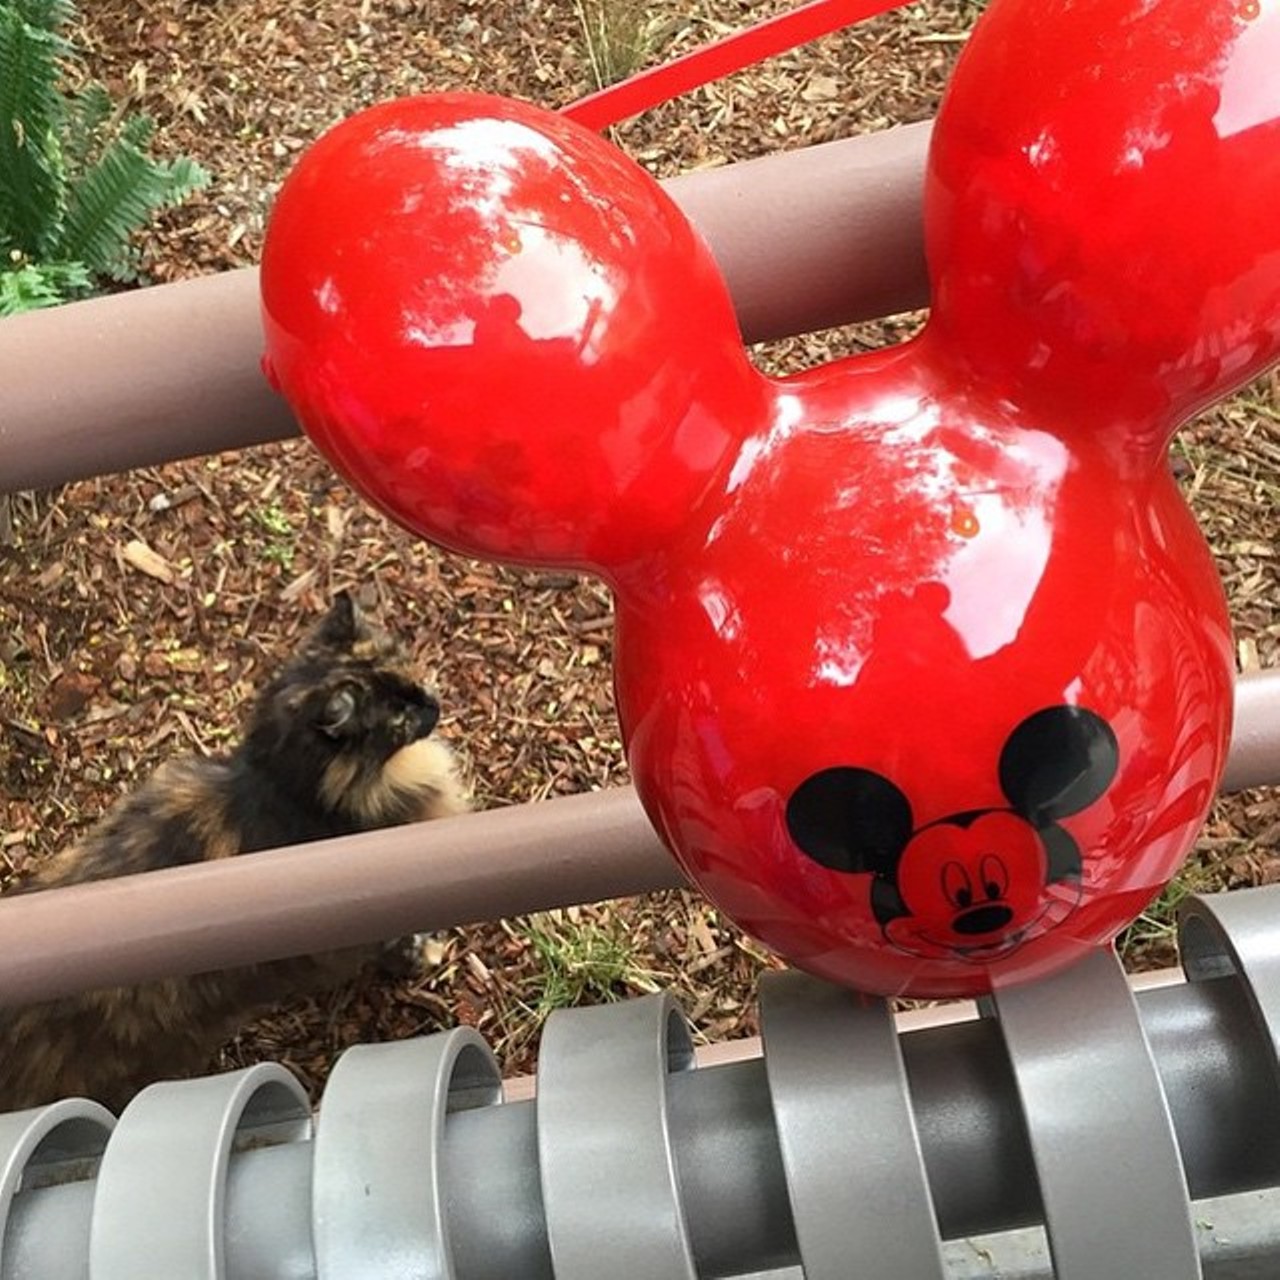 There's an Instagram account that chronicles the feral cats of Disney parks